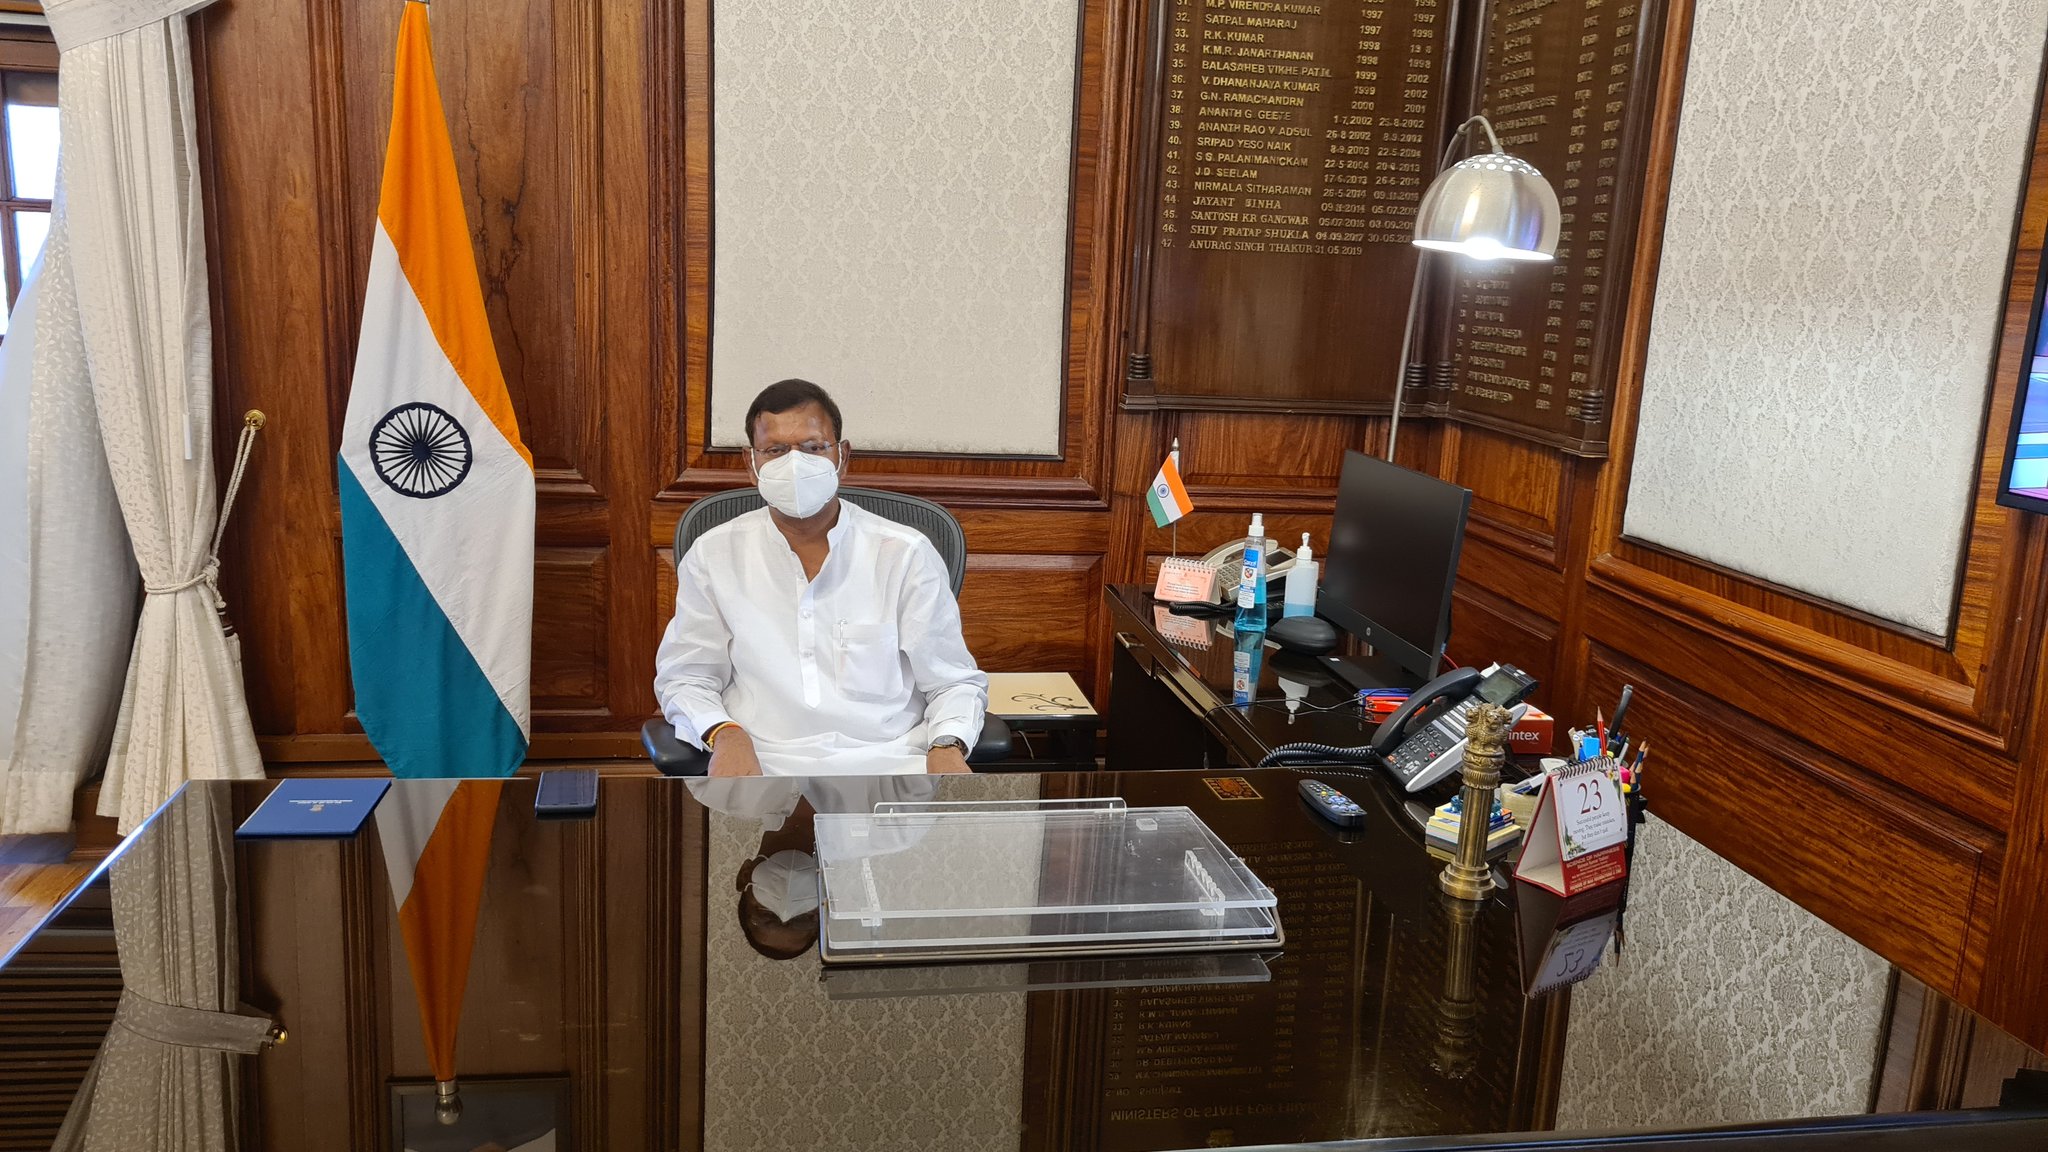 Pankaj Chaudhary on Twitter: "Took charge as State Minister of Finance today. Once again from the core of my heart, I extend my gratitude to Hon'ble PM @narendramodi ji for entrusting me